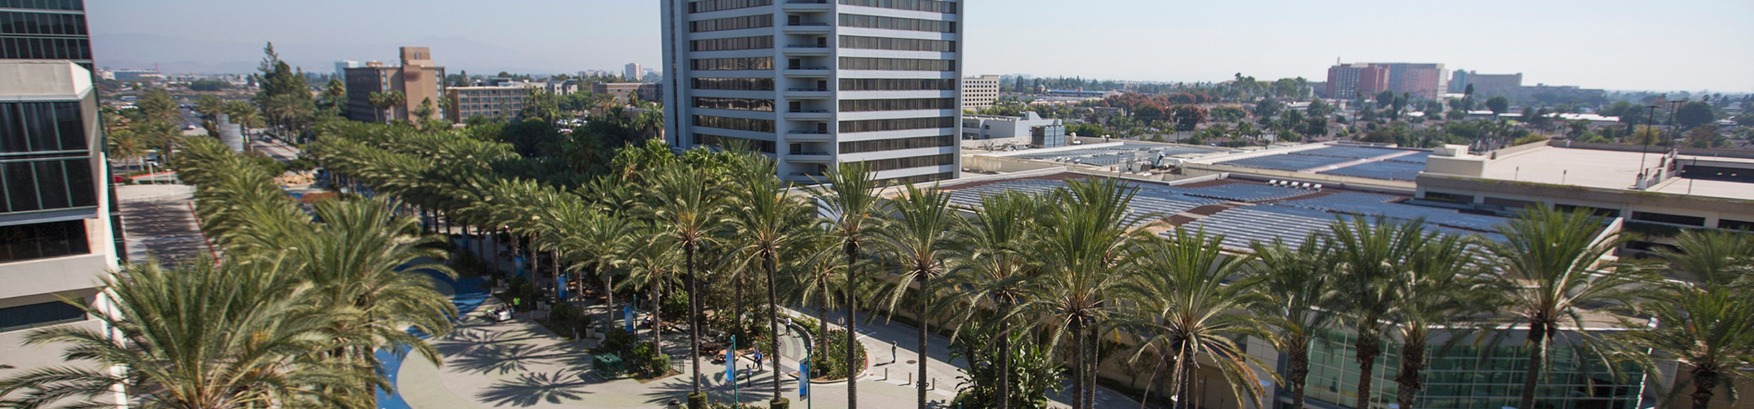 Sunny cityscape with palm trees where you can find a leading Leading Car Accident Lawyer in Anaheim